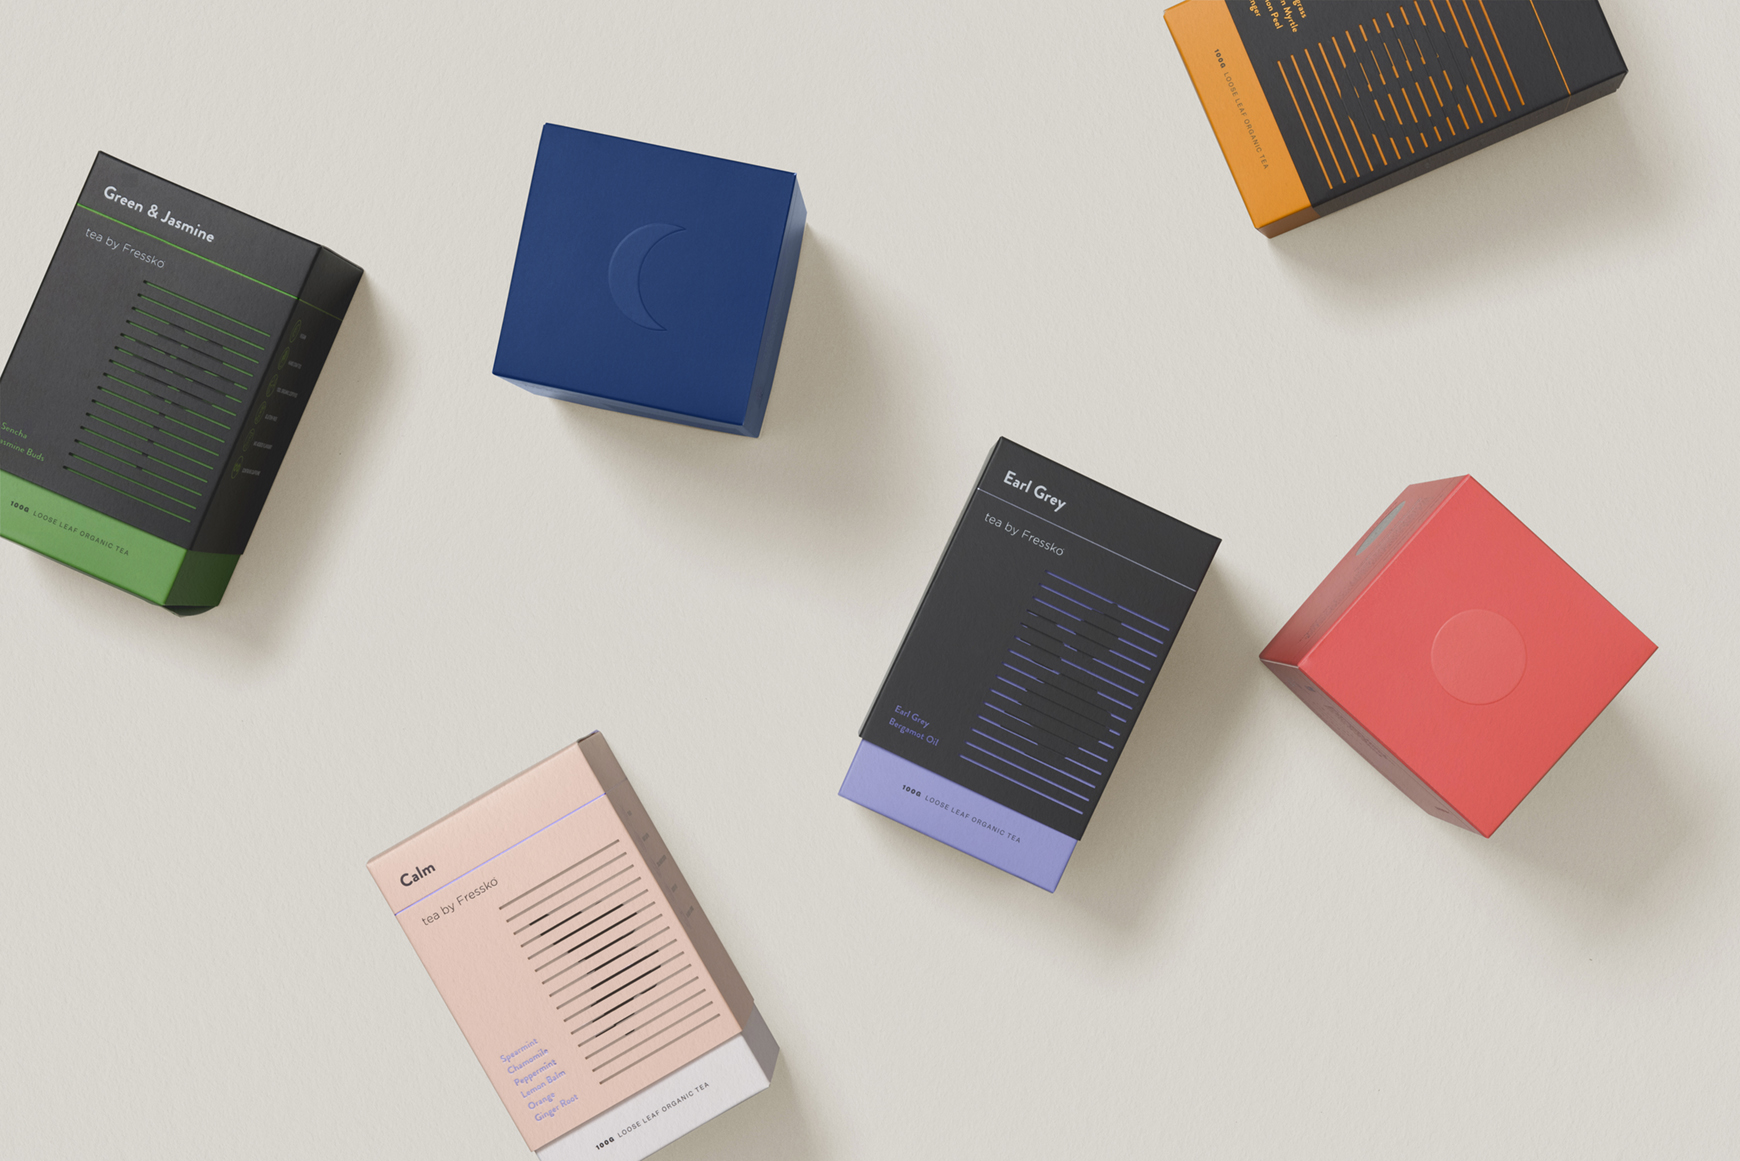 Tea by Fressko - Packaging Design by Small & CO